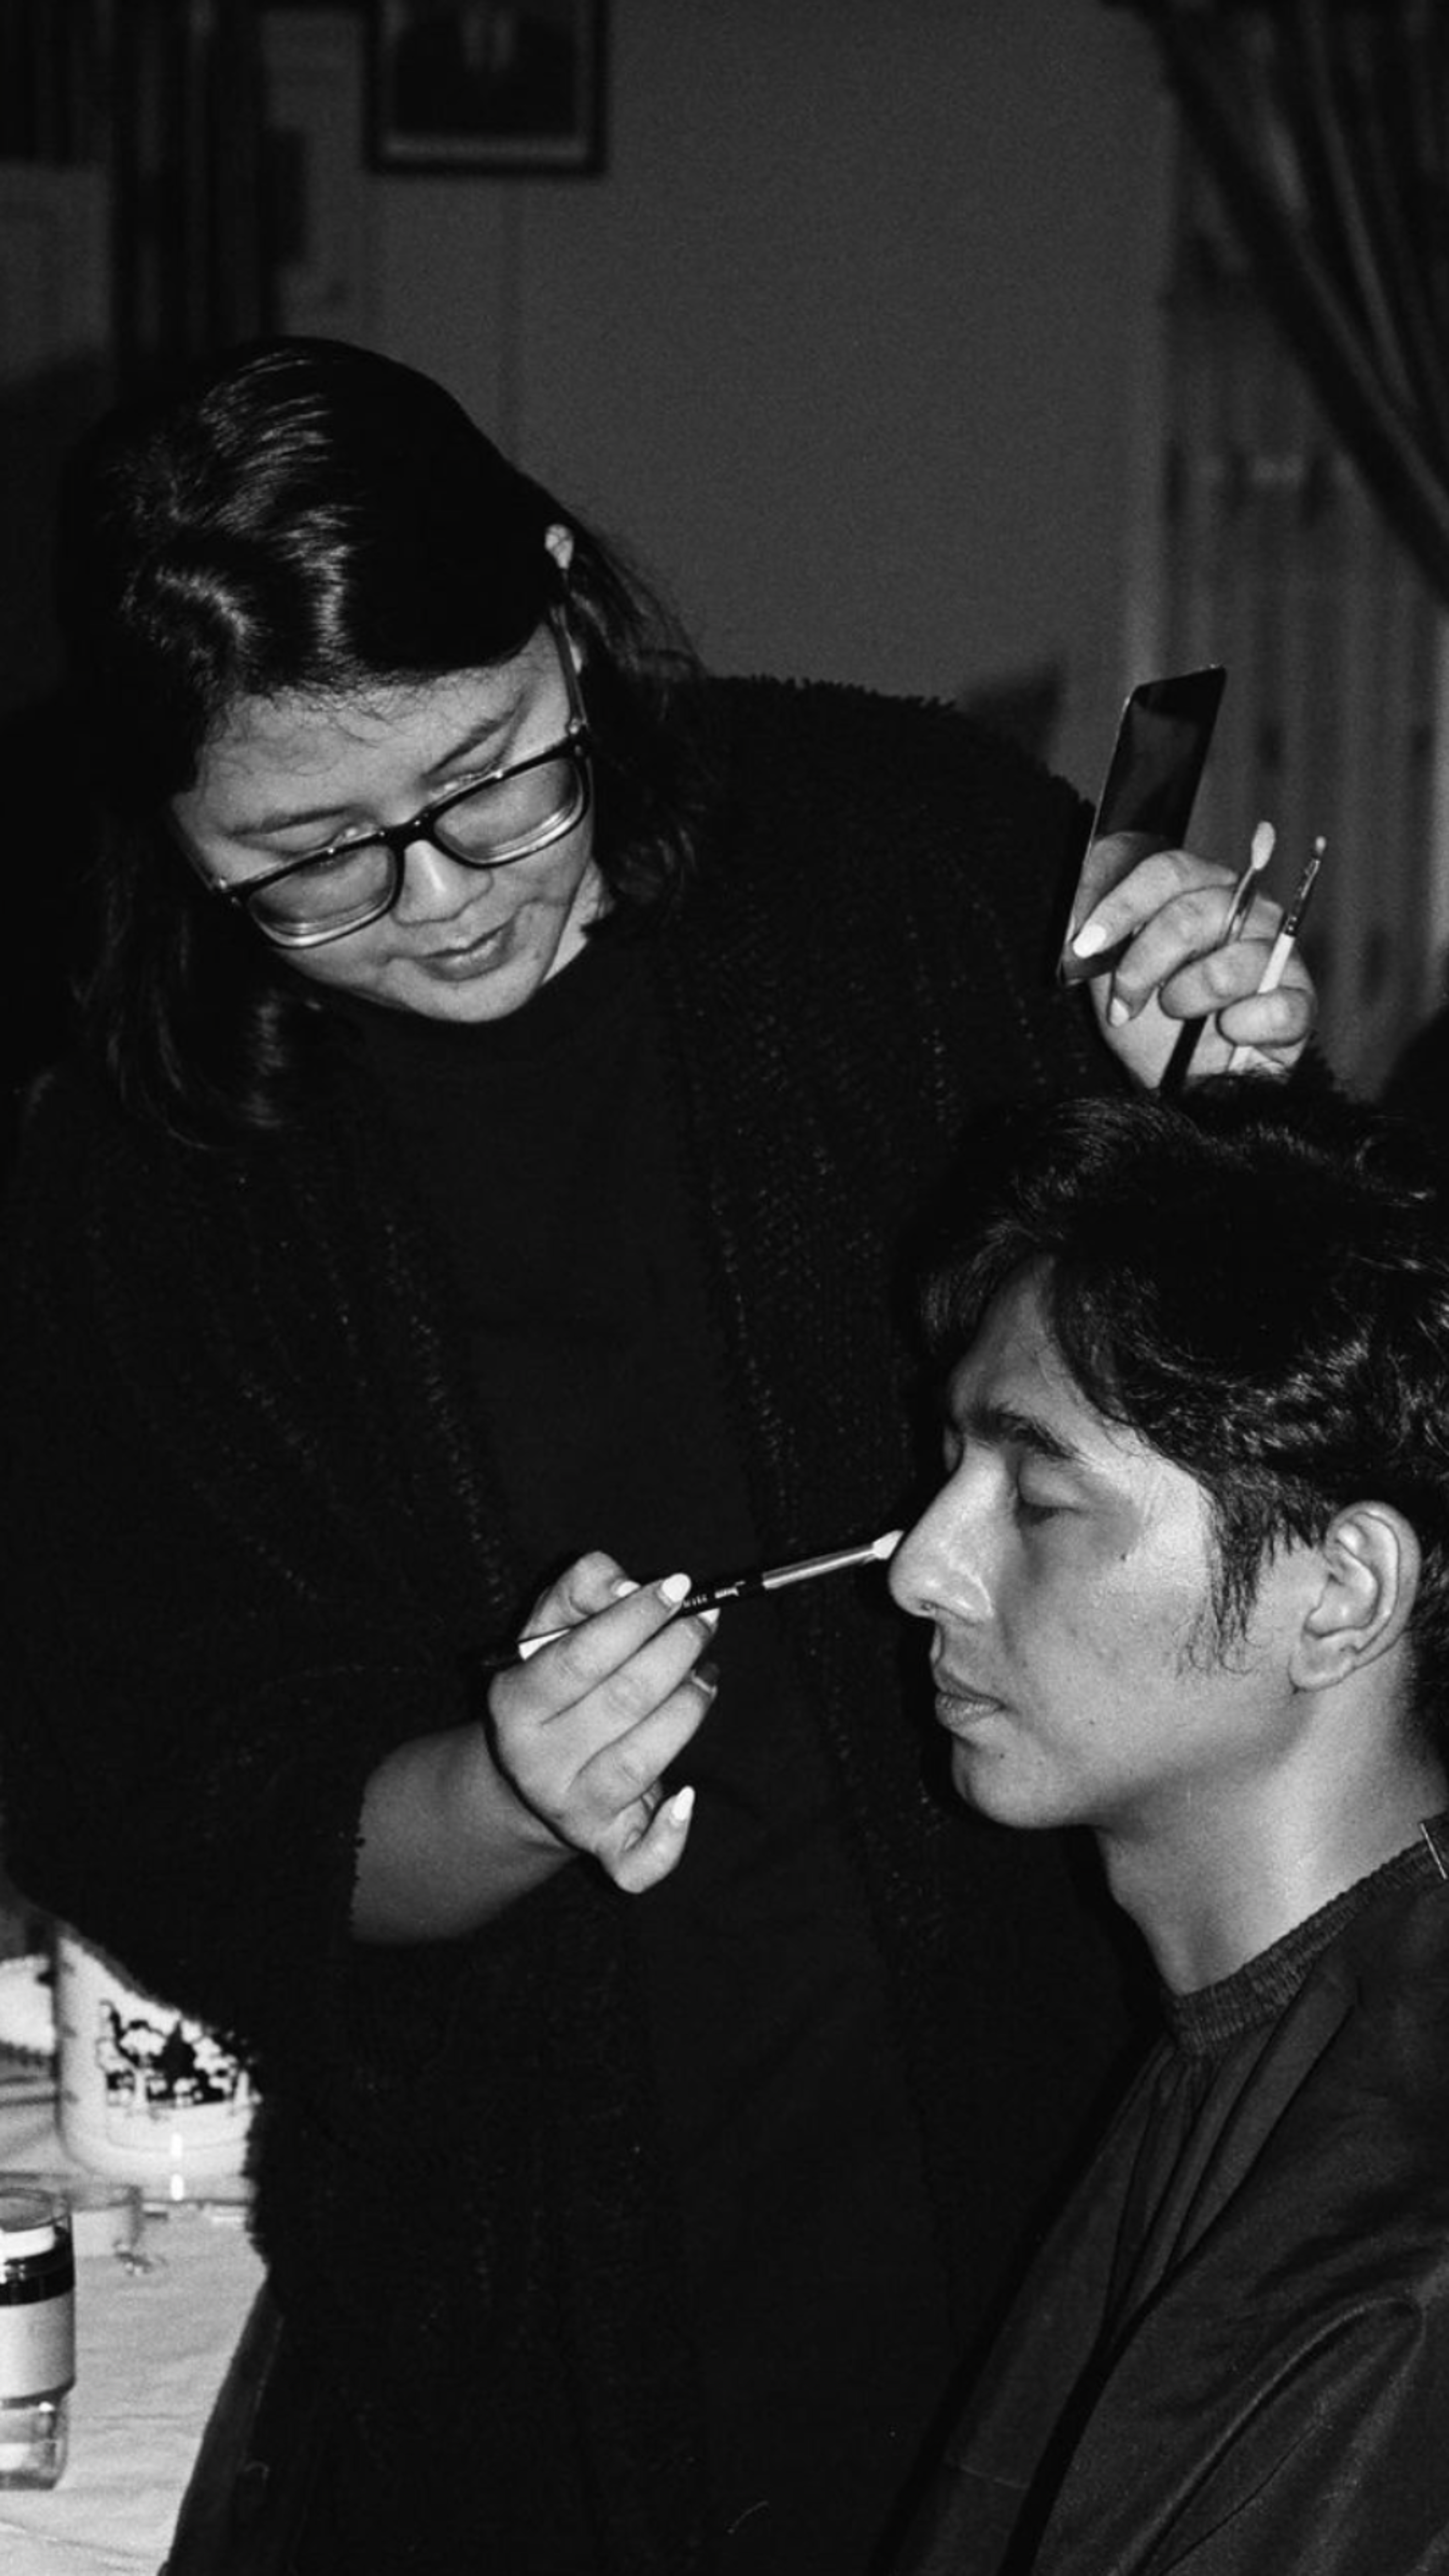 A focused makeup artist applies makeup to a seated man in a black and white setting.